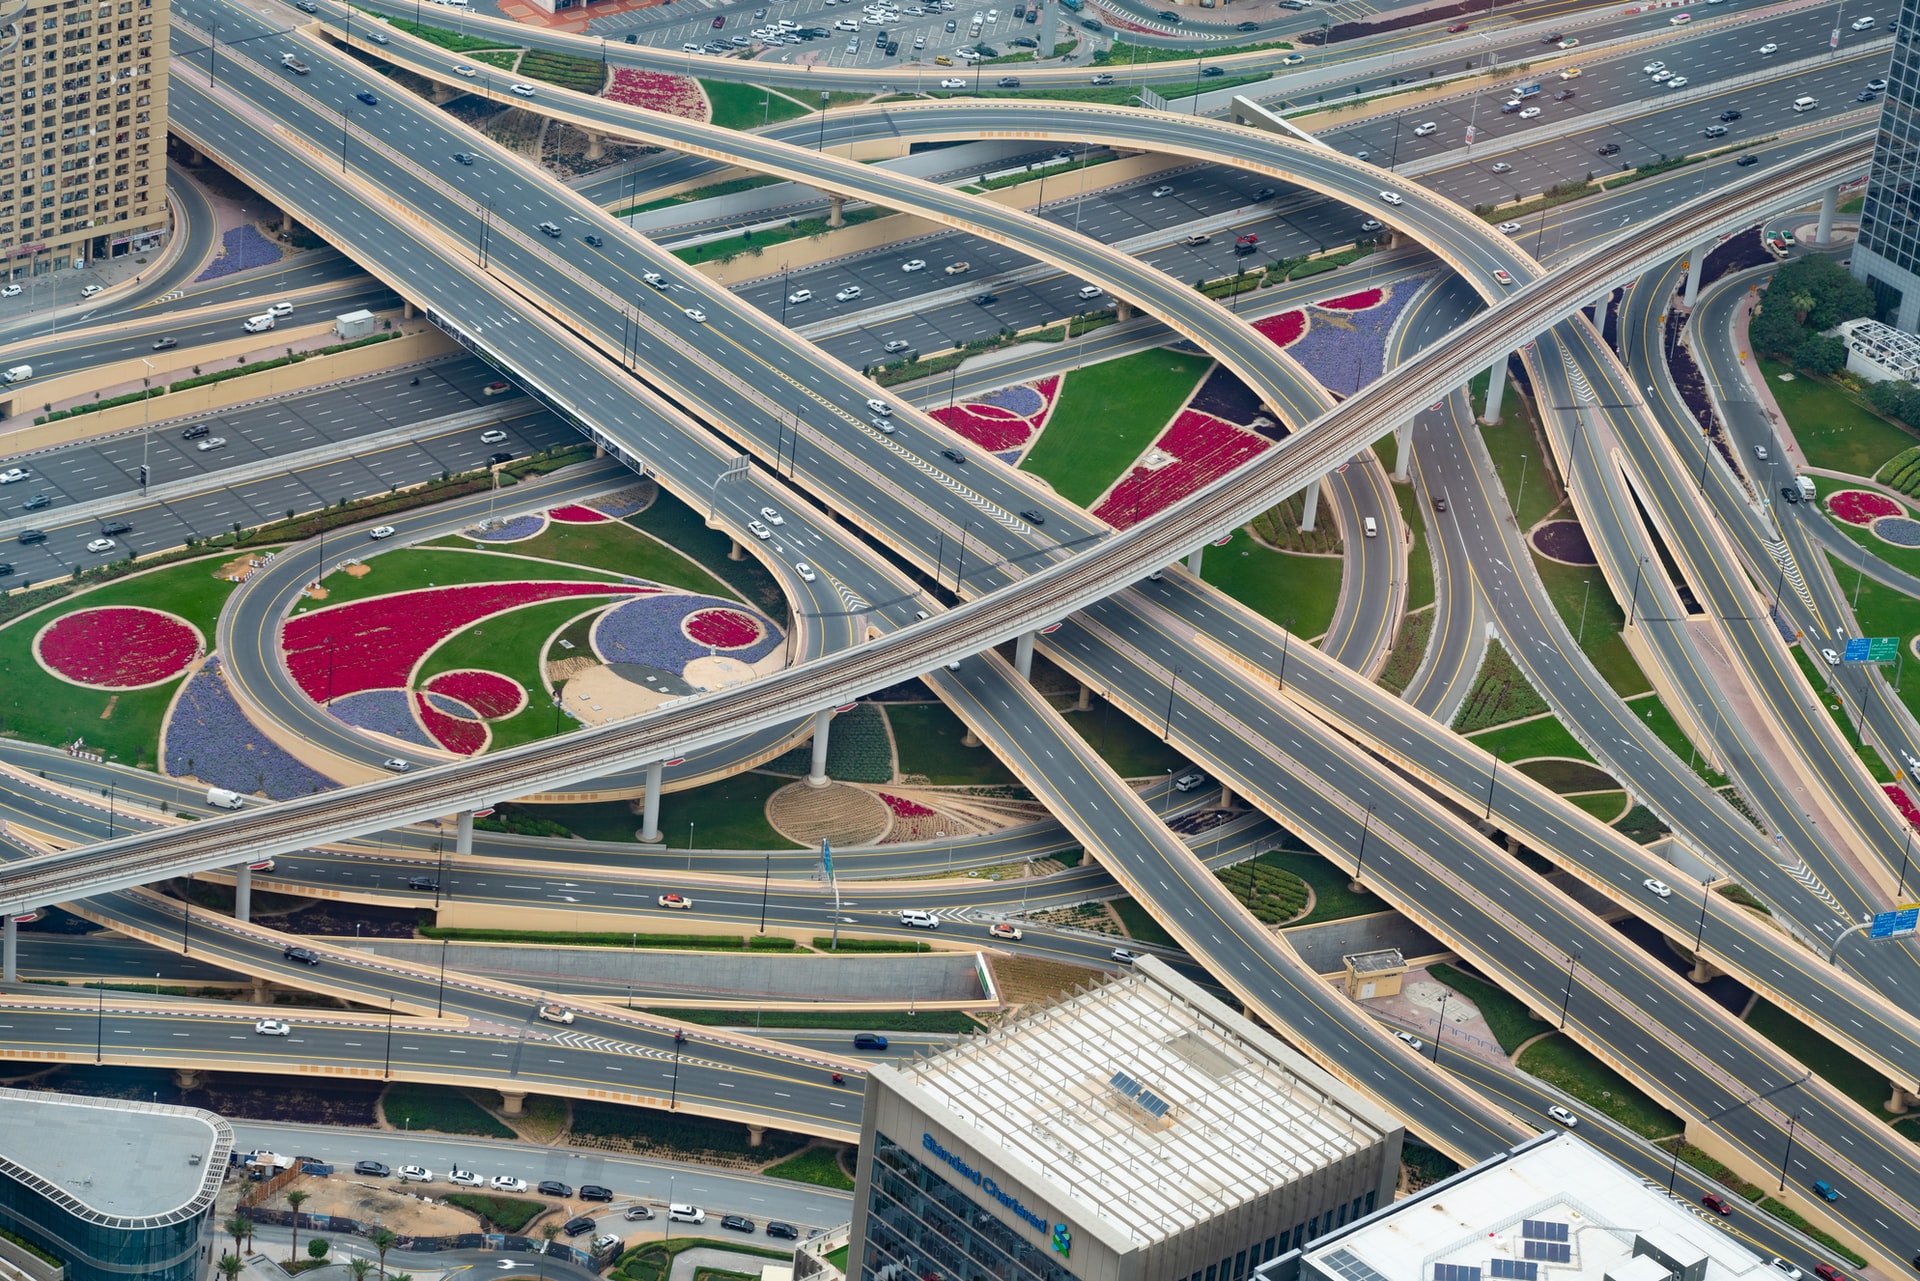 A very complex intersection seen from a high vantage point